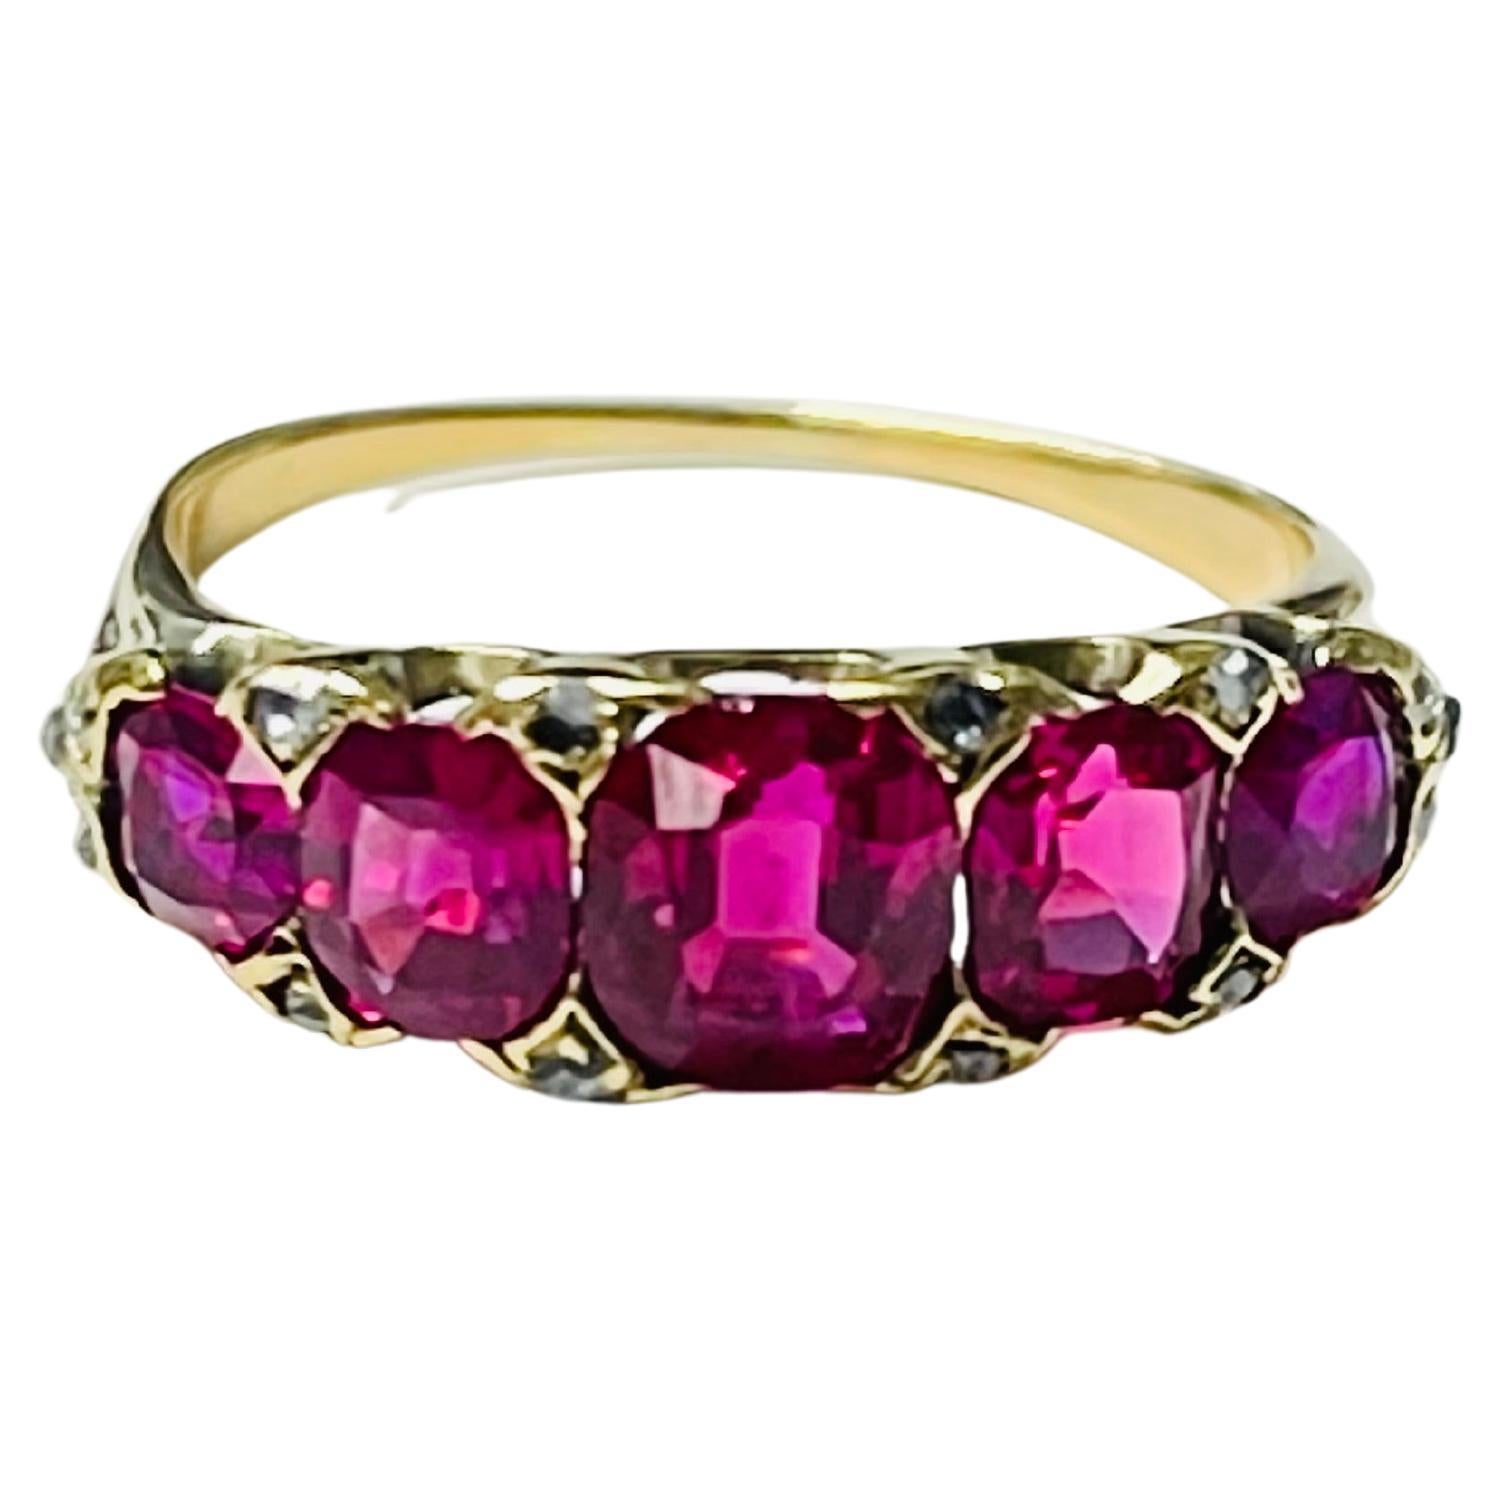 GIA Certified Antique Burma No Heat Ruby And Rose Cut Diamond Band Ring In 18K. 